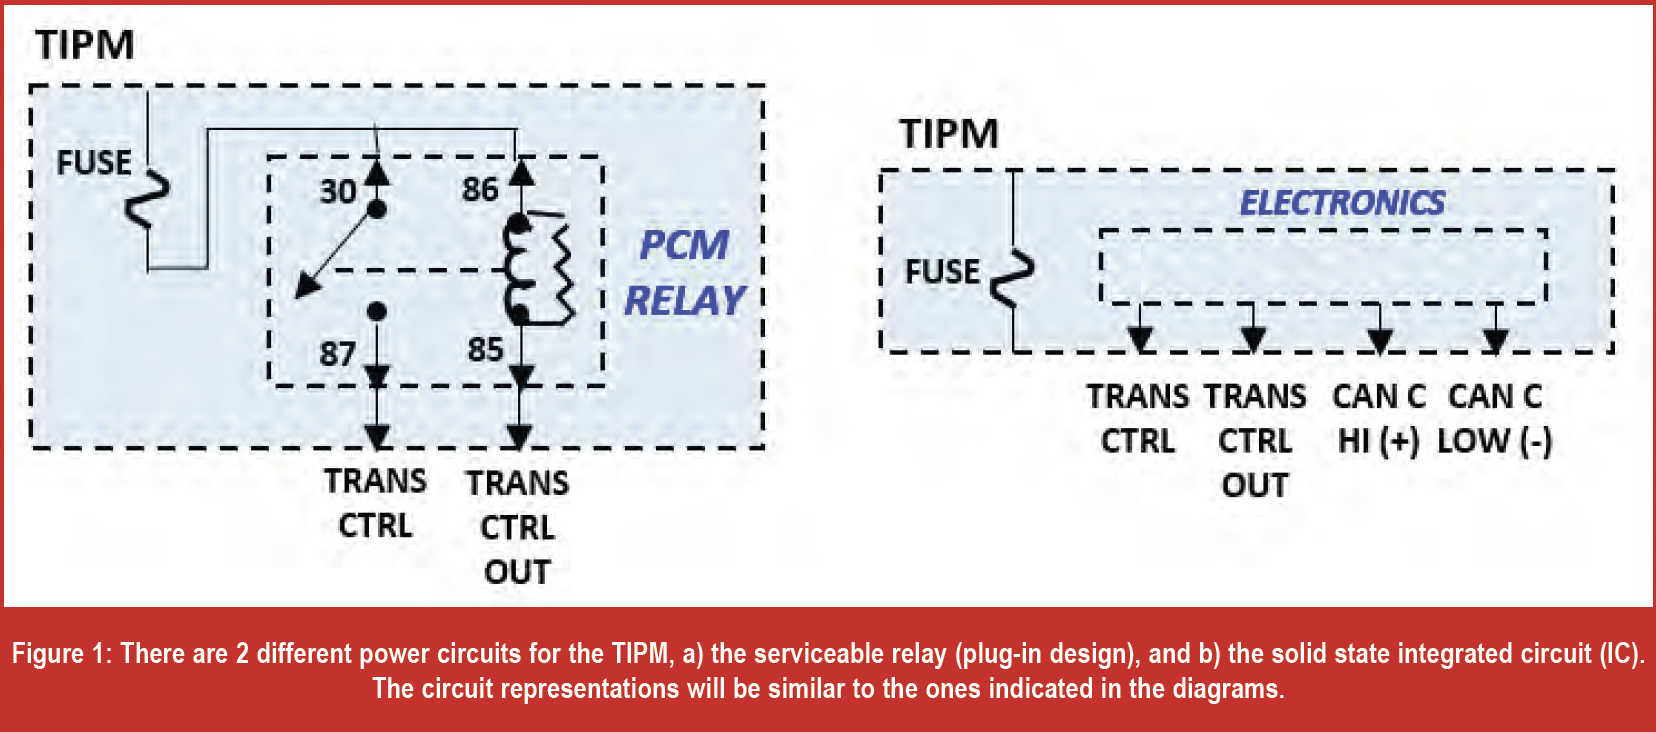 Gears Magazine - TIPM Problems! Intermittent Fail Safe, Codes, Related  Concerns and Solutions